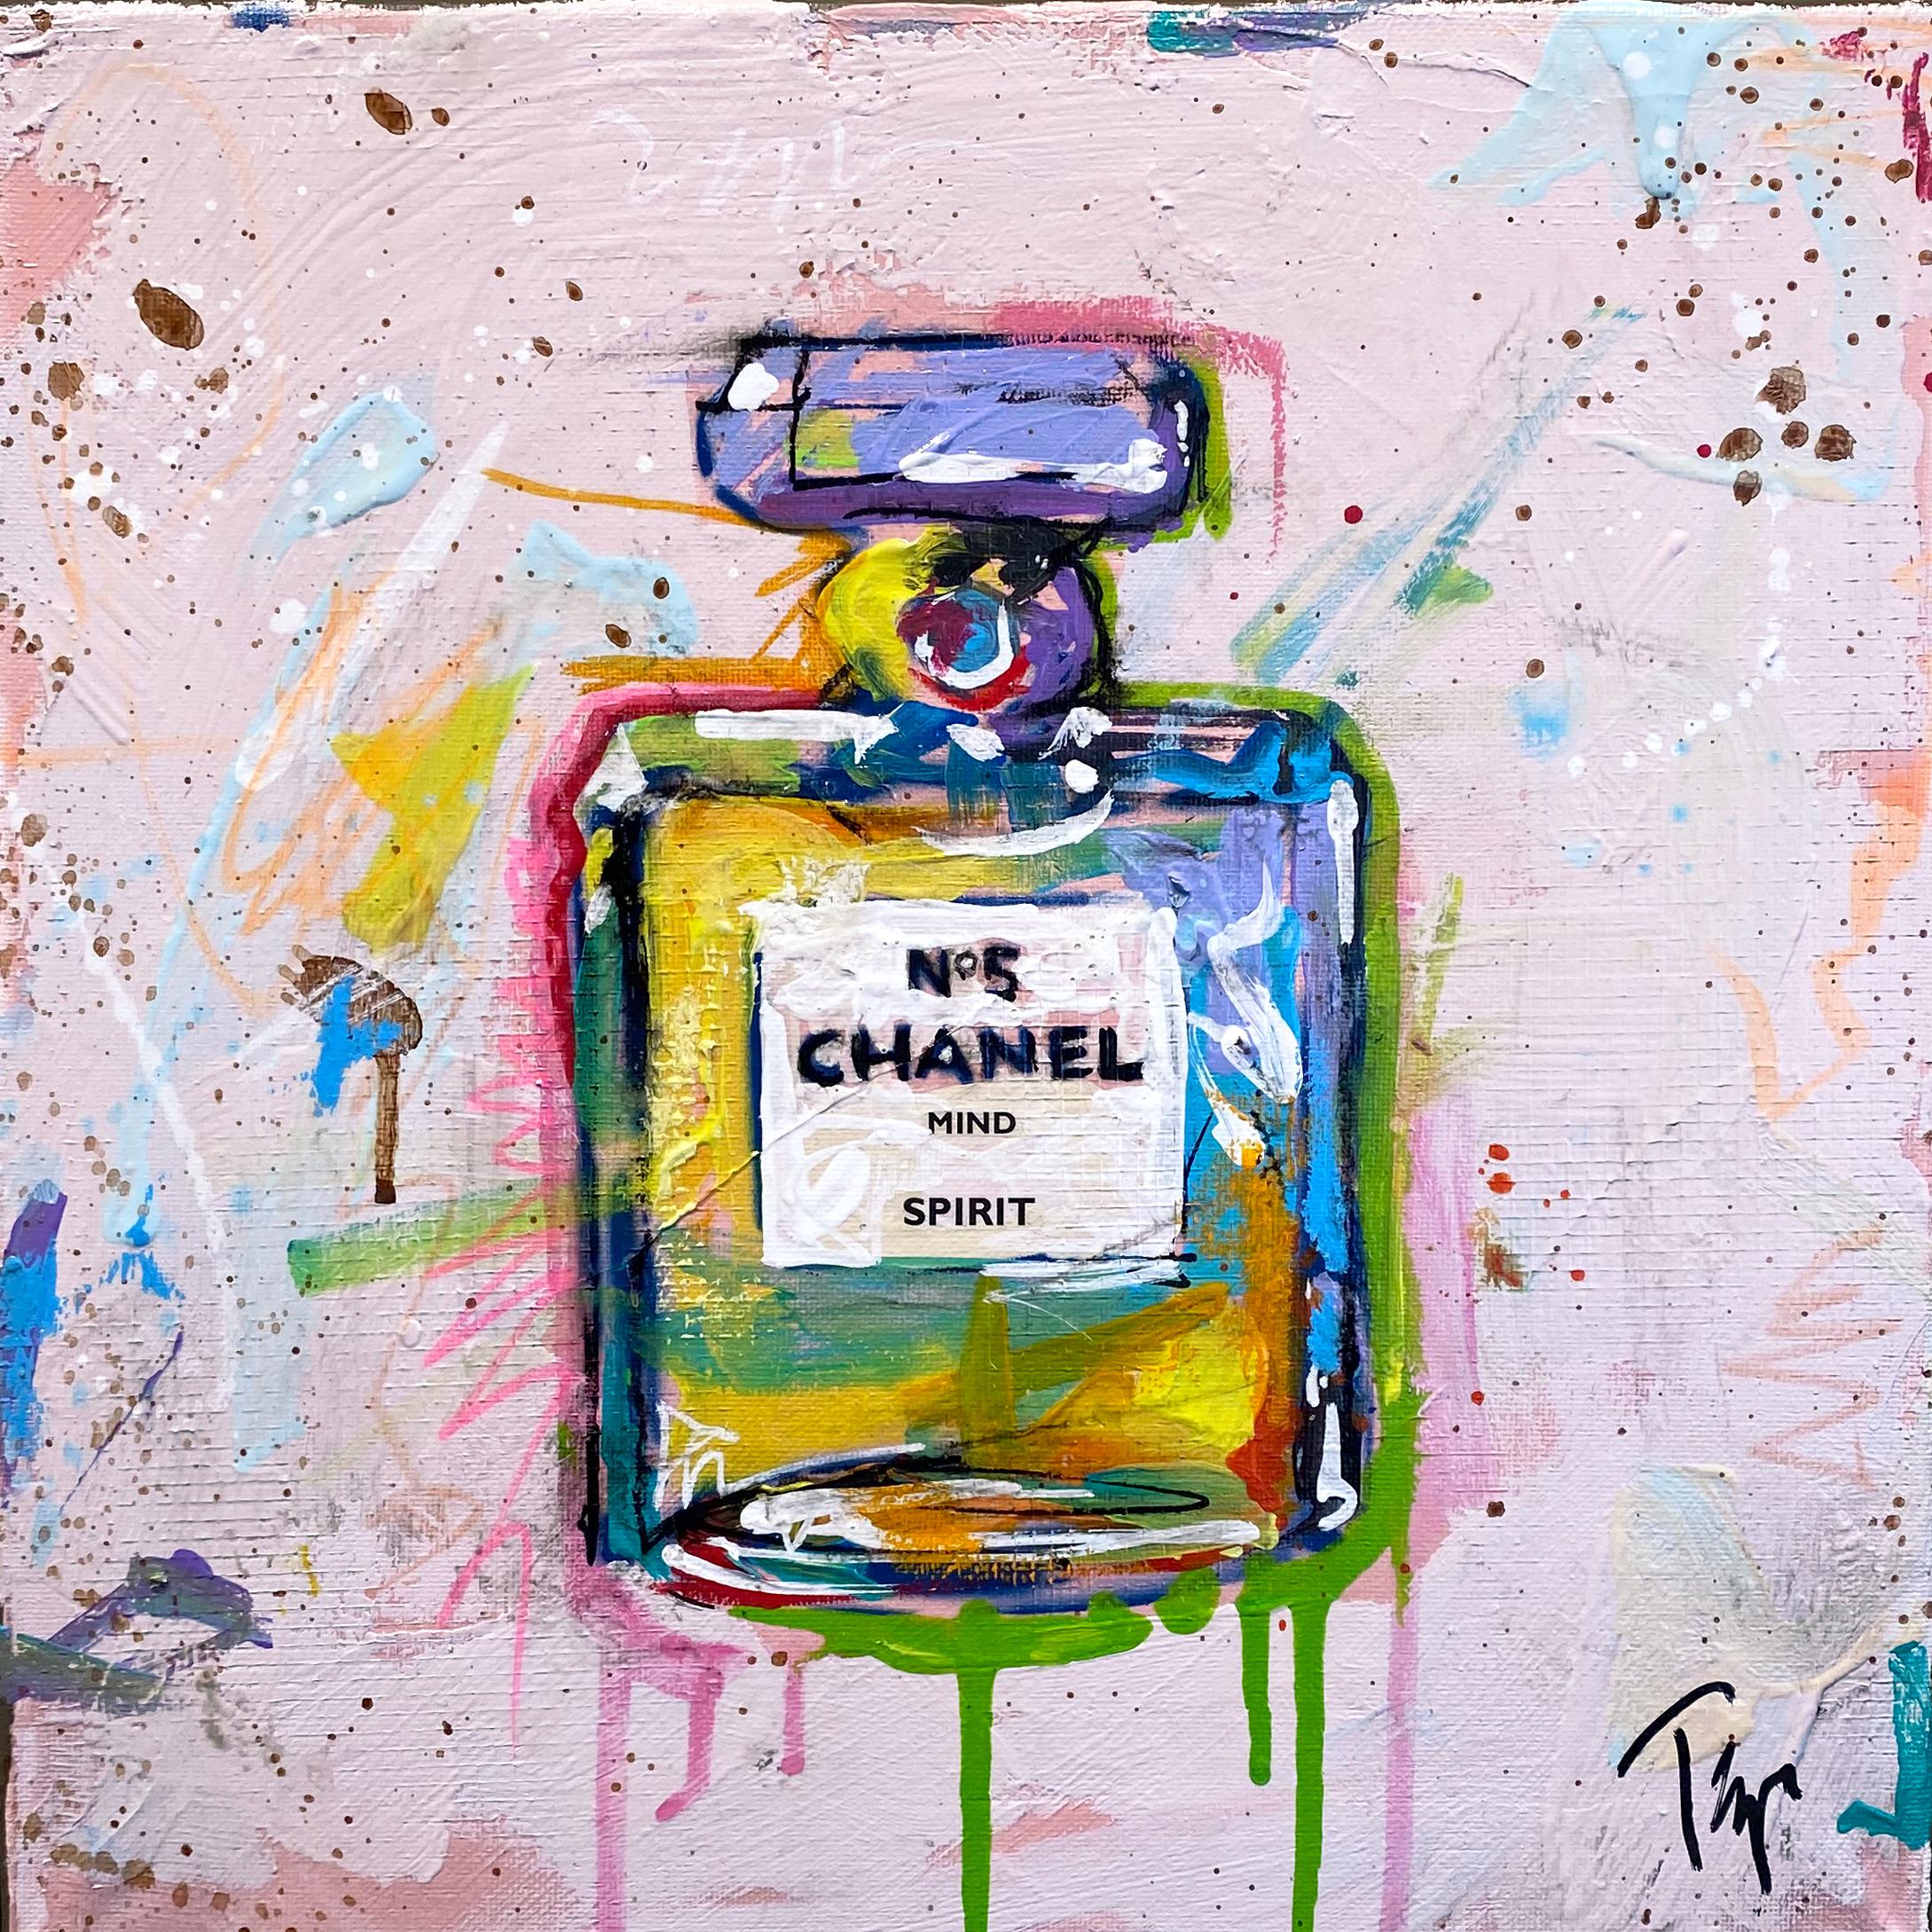 Trip Park - Trip Park, Spirited Chanel, 12x12 Colorful Chanel No5 Perfume  Bottle Painting For Sale at 1stDibs